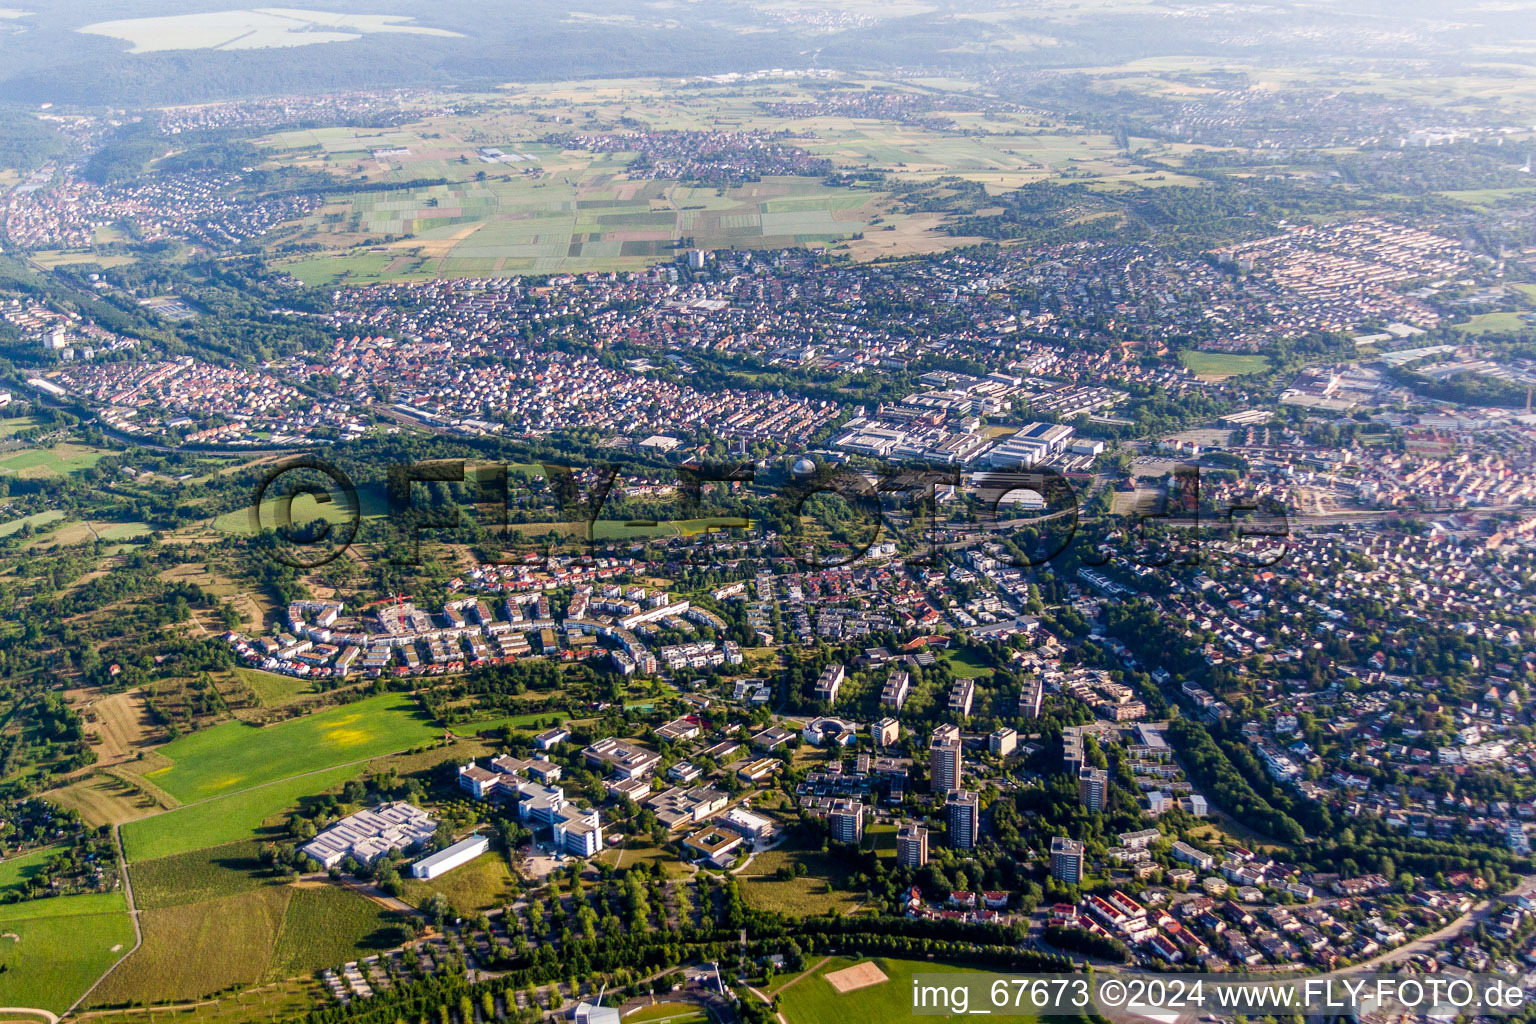 Town View of the streets and houses of the residential areas in the district Ringelbach in Reutlingen in the state Baden-Wurttemberg, Germany